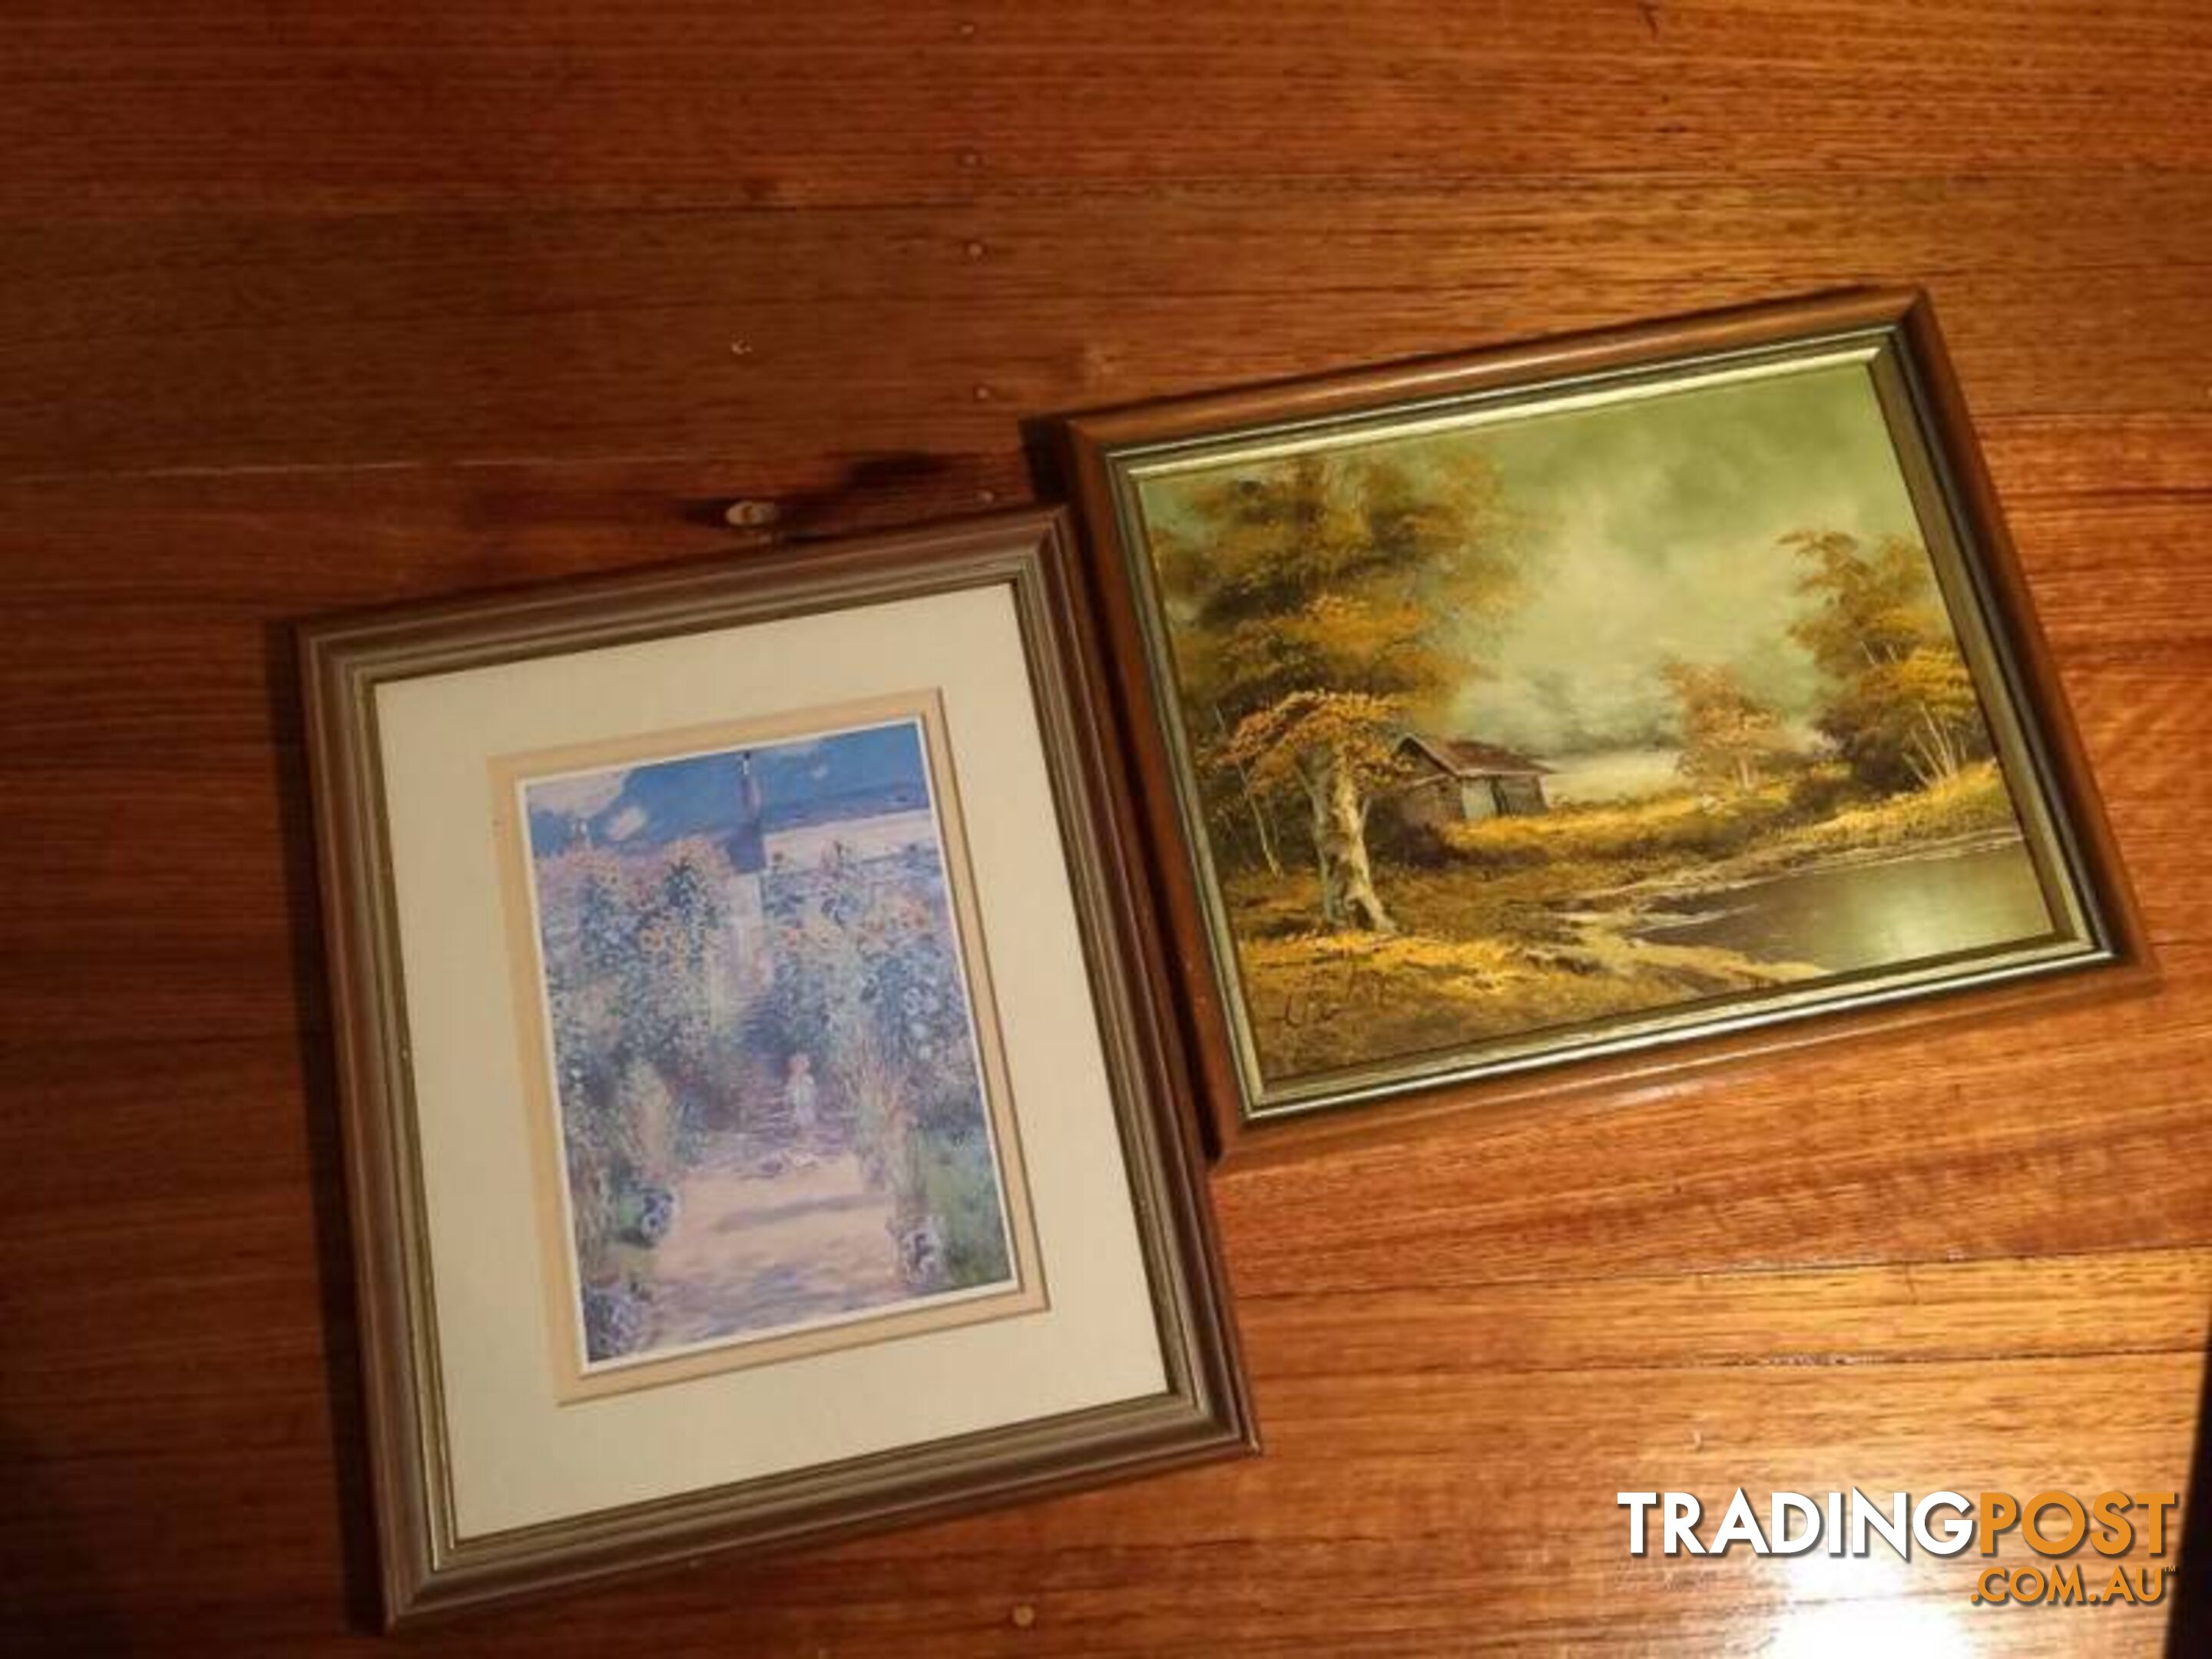 A PAIR OF 8 X 6 PICTURE FRAMES $10 THE PAIR